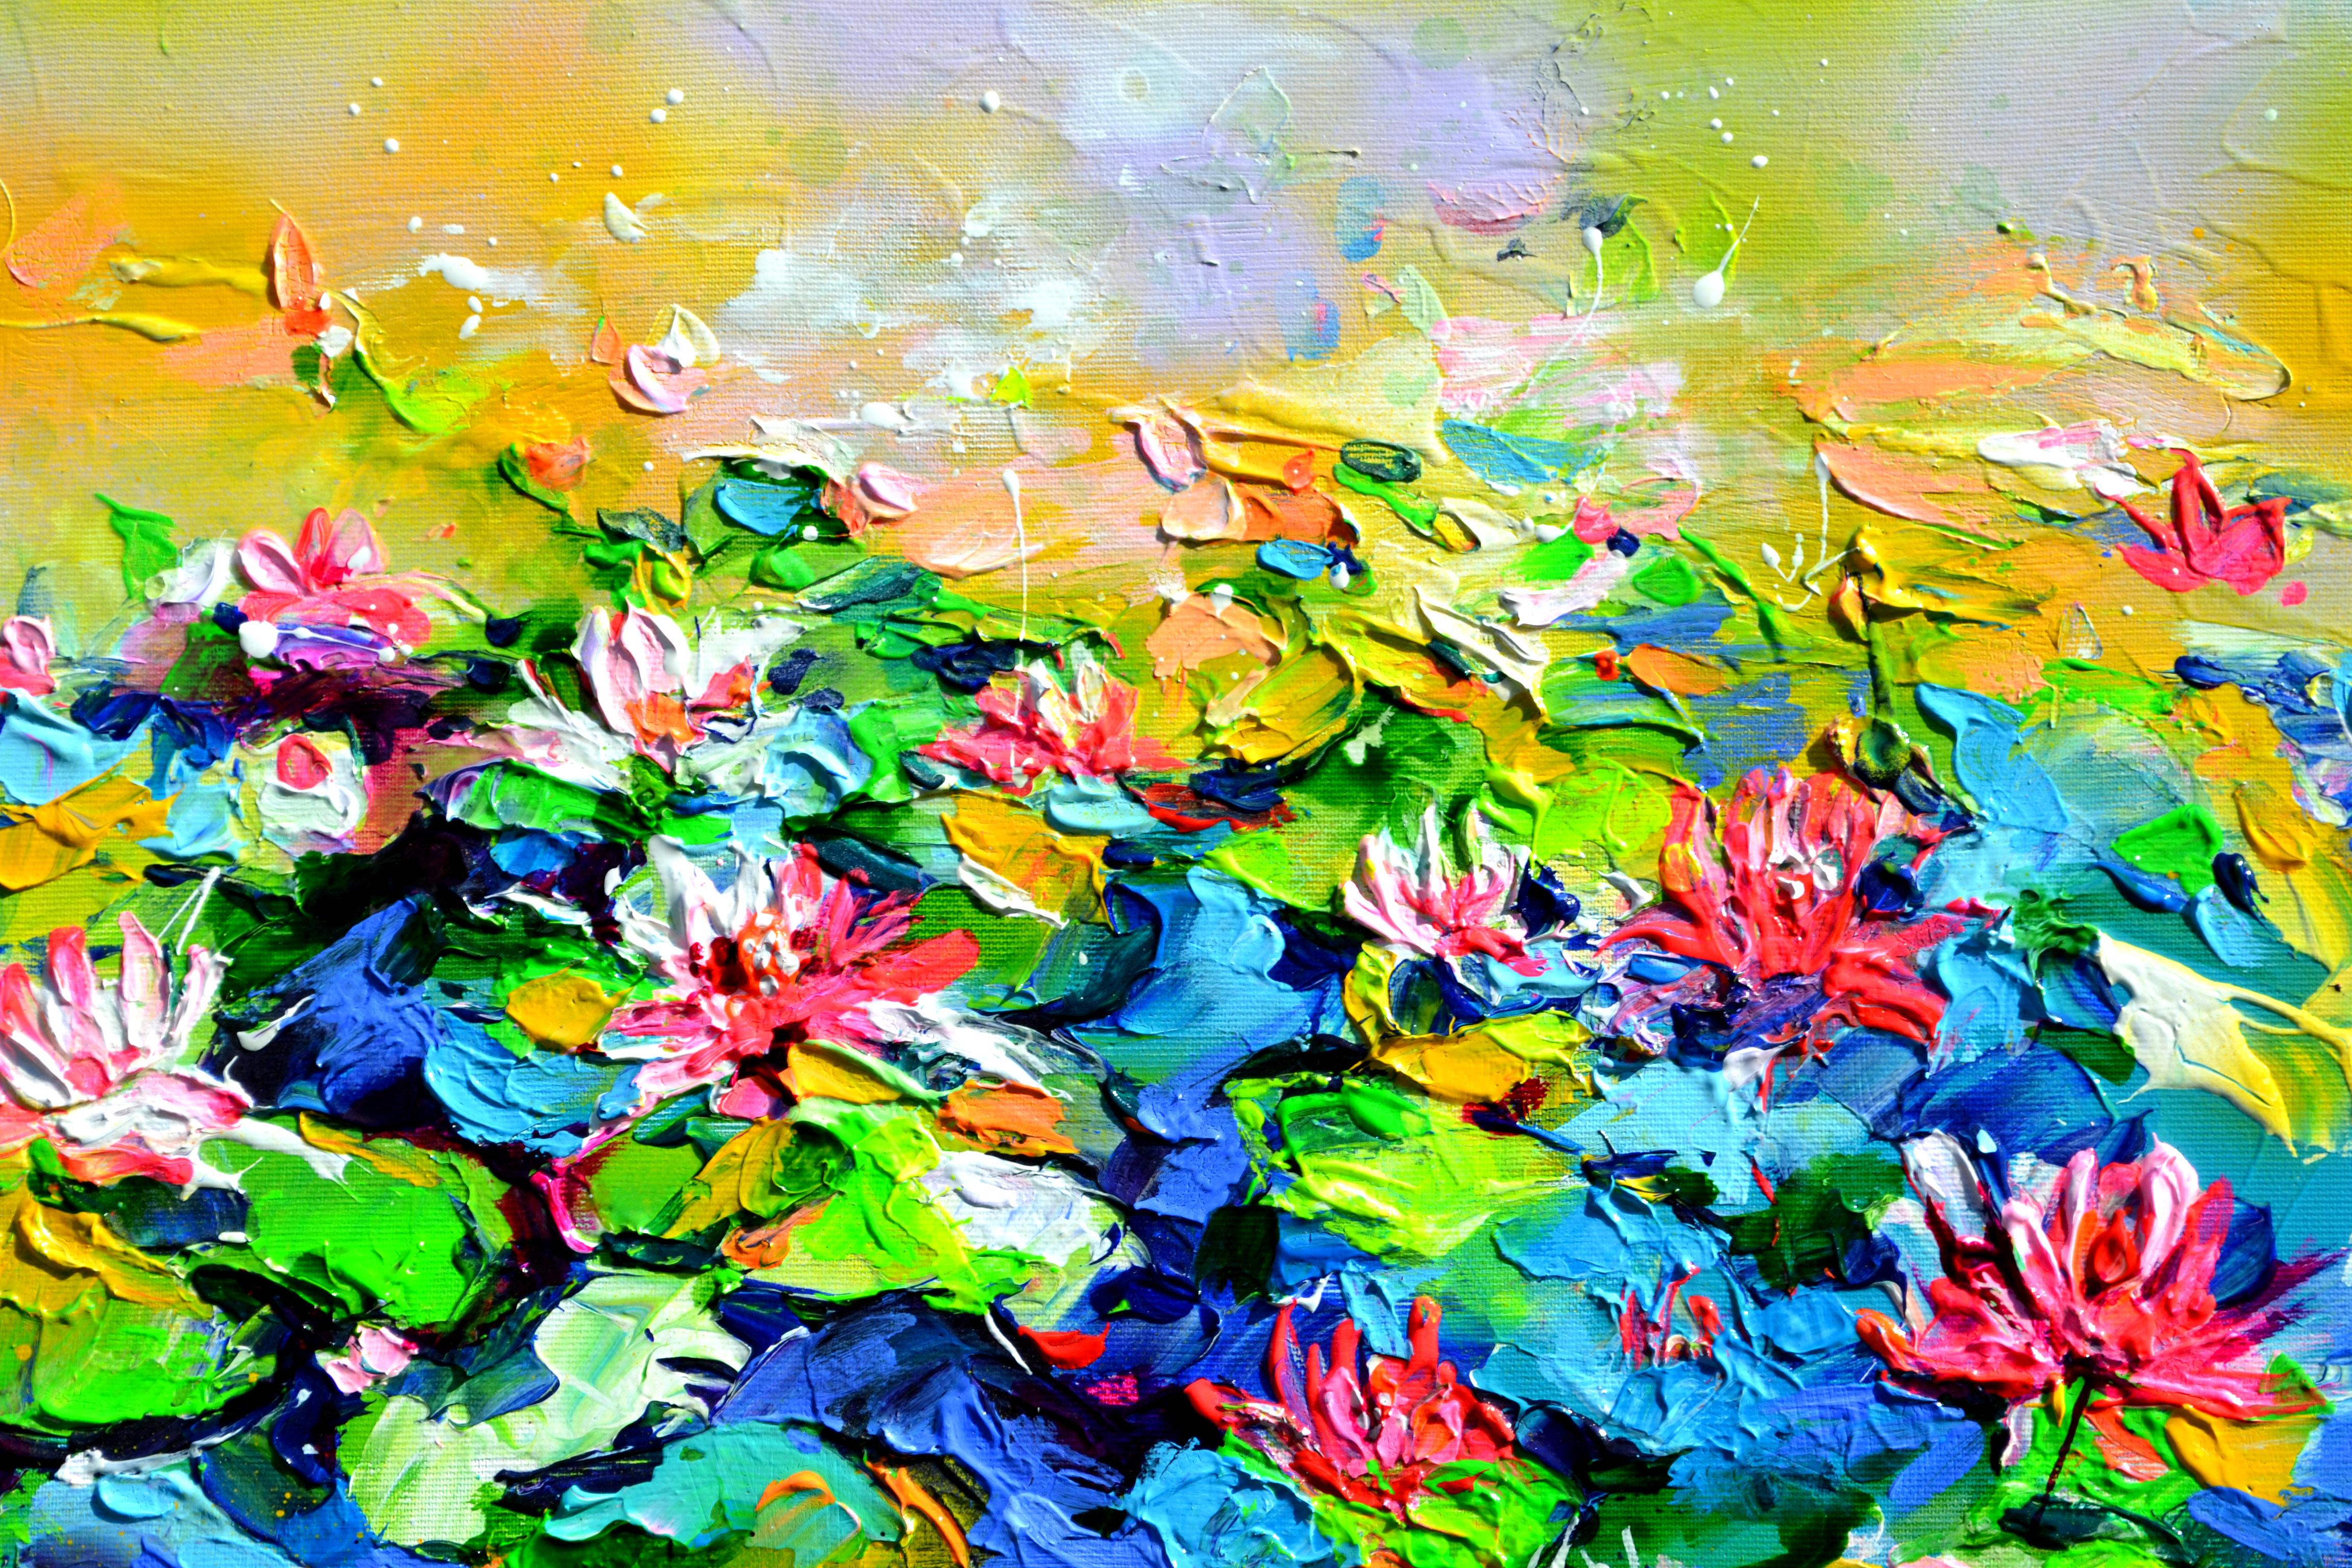 READY TO HANG PAINTING
A beautiful large modern floral painting, a marvelous water lilies on the pond landscape, made with professional varnished acrylics and Amsterdam acrylic sprays on stretched canvas with heavy reliefs made of palette knife.
I